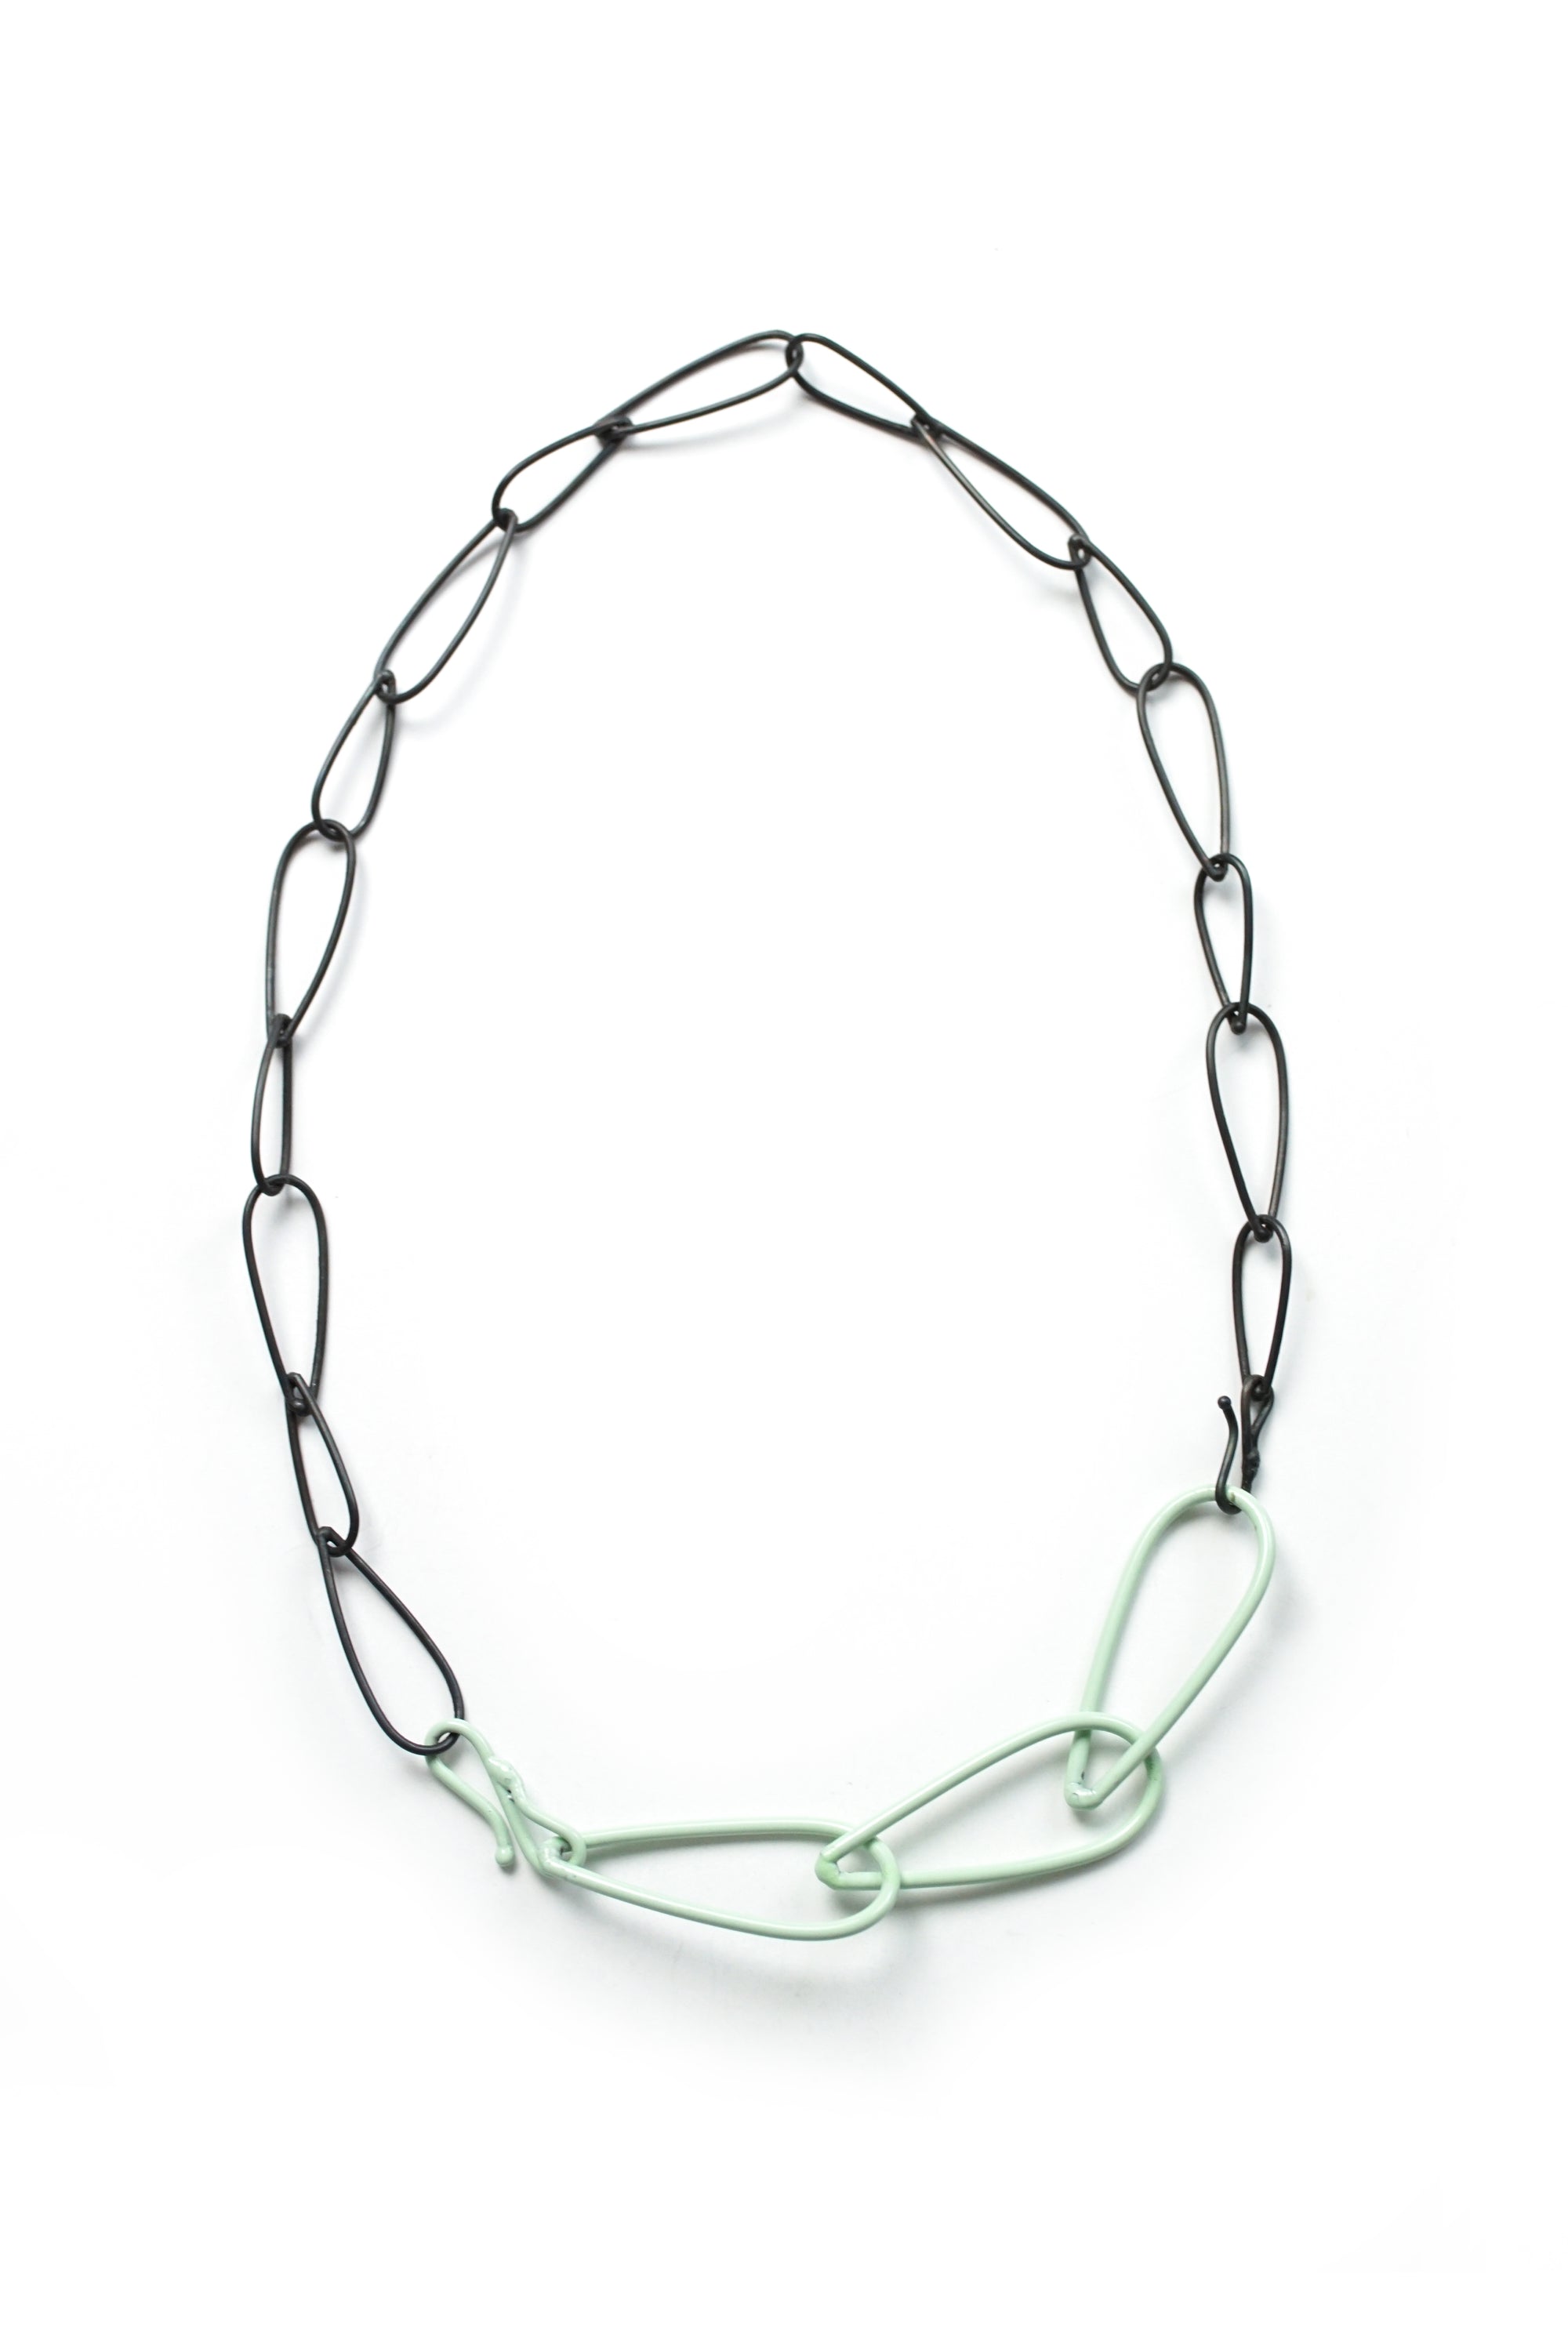 Modular Necklace in Steel and Soft Mint